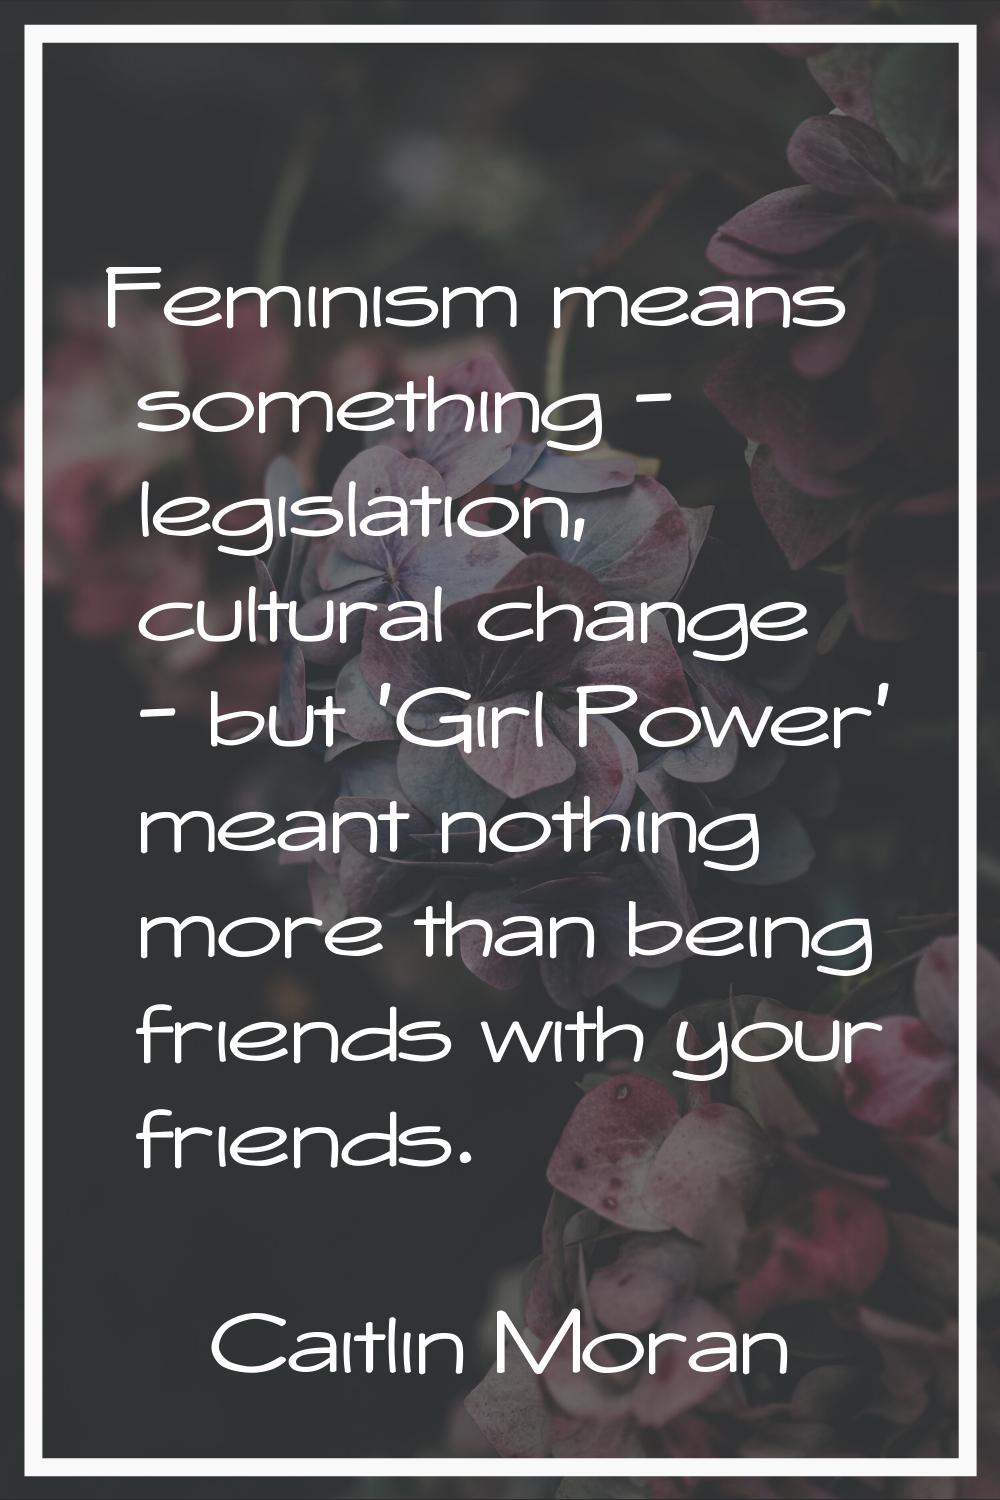 Feminism means something - legislation, cultural change - but 'Girl Power' meant nothing more than 